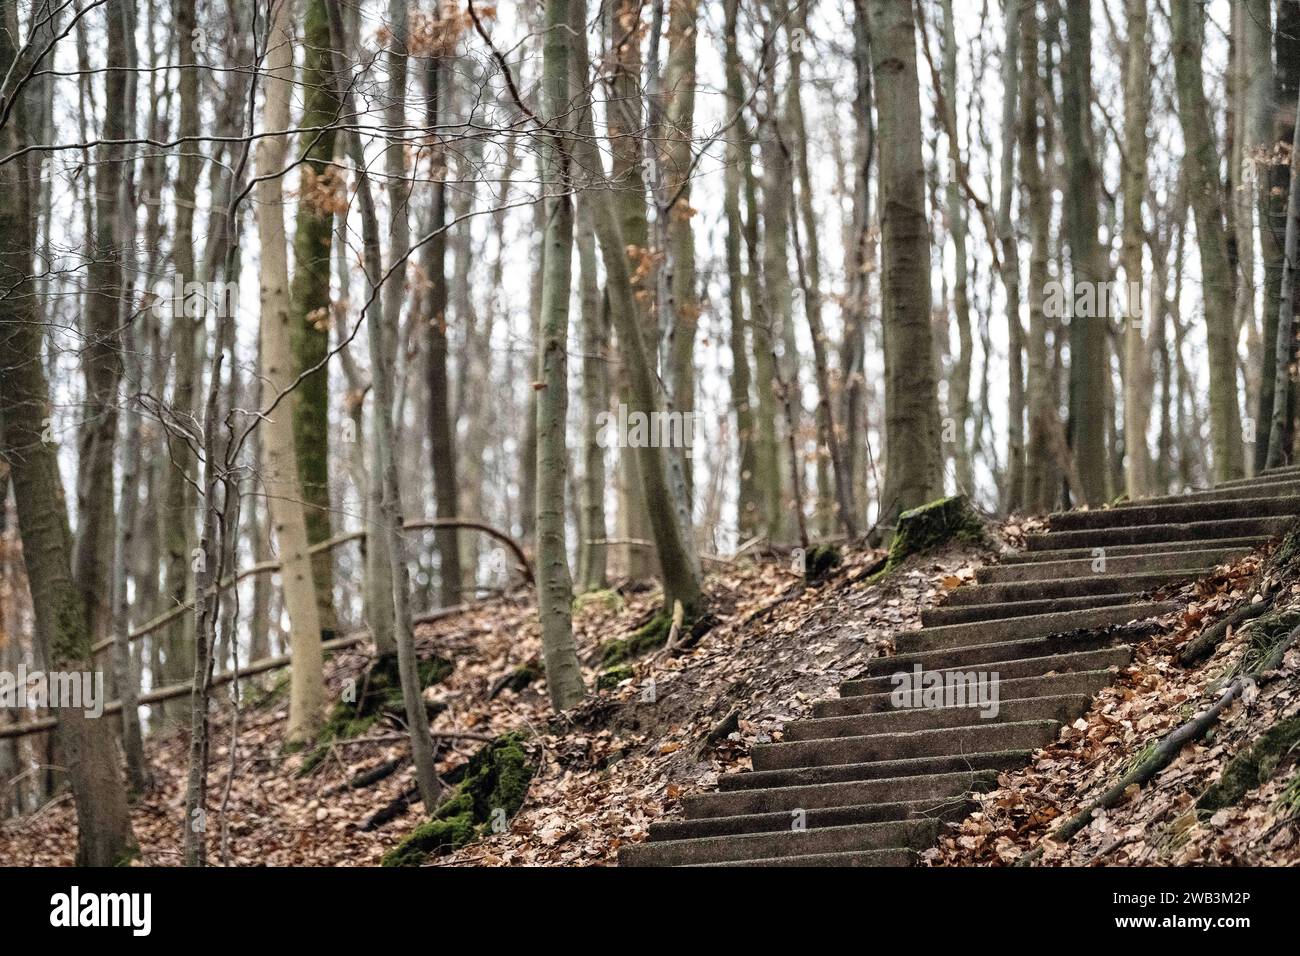 Hessisch Oldendorf, Germany. 31st Dec, 2023. A stone staircase can be seen in front of trees in the Hohenstein natural forest. The Hohenstein forest area is one of the largest wilderness areas in Lower Saxony. Credit: Swen Pförtner/dpa/Alamy Live News Stock Photo